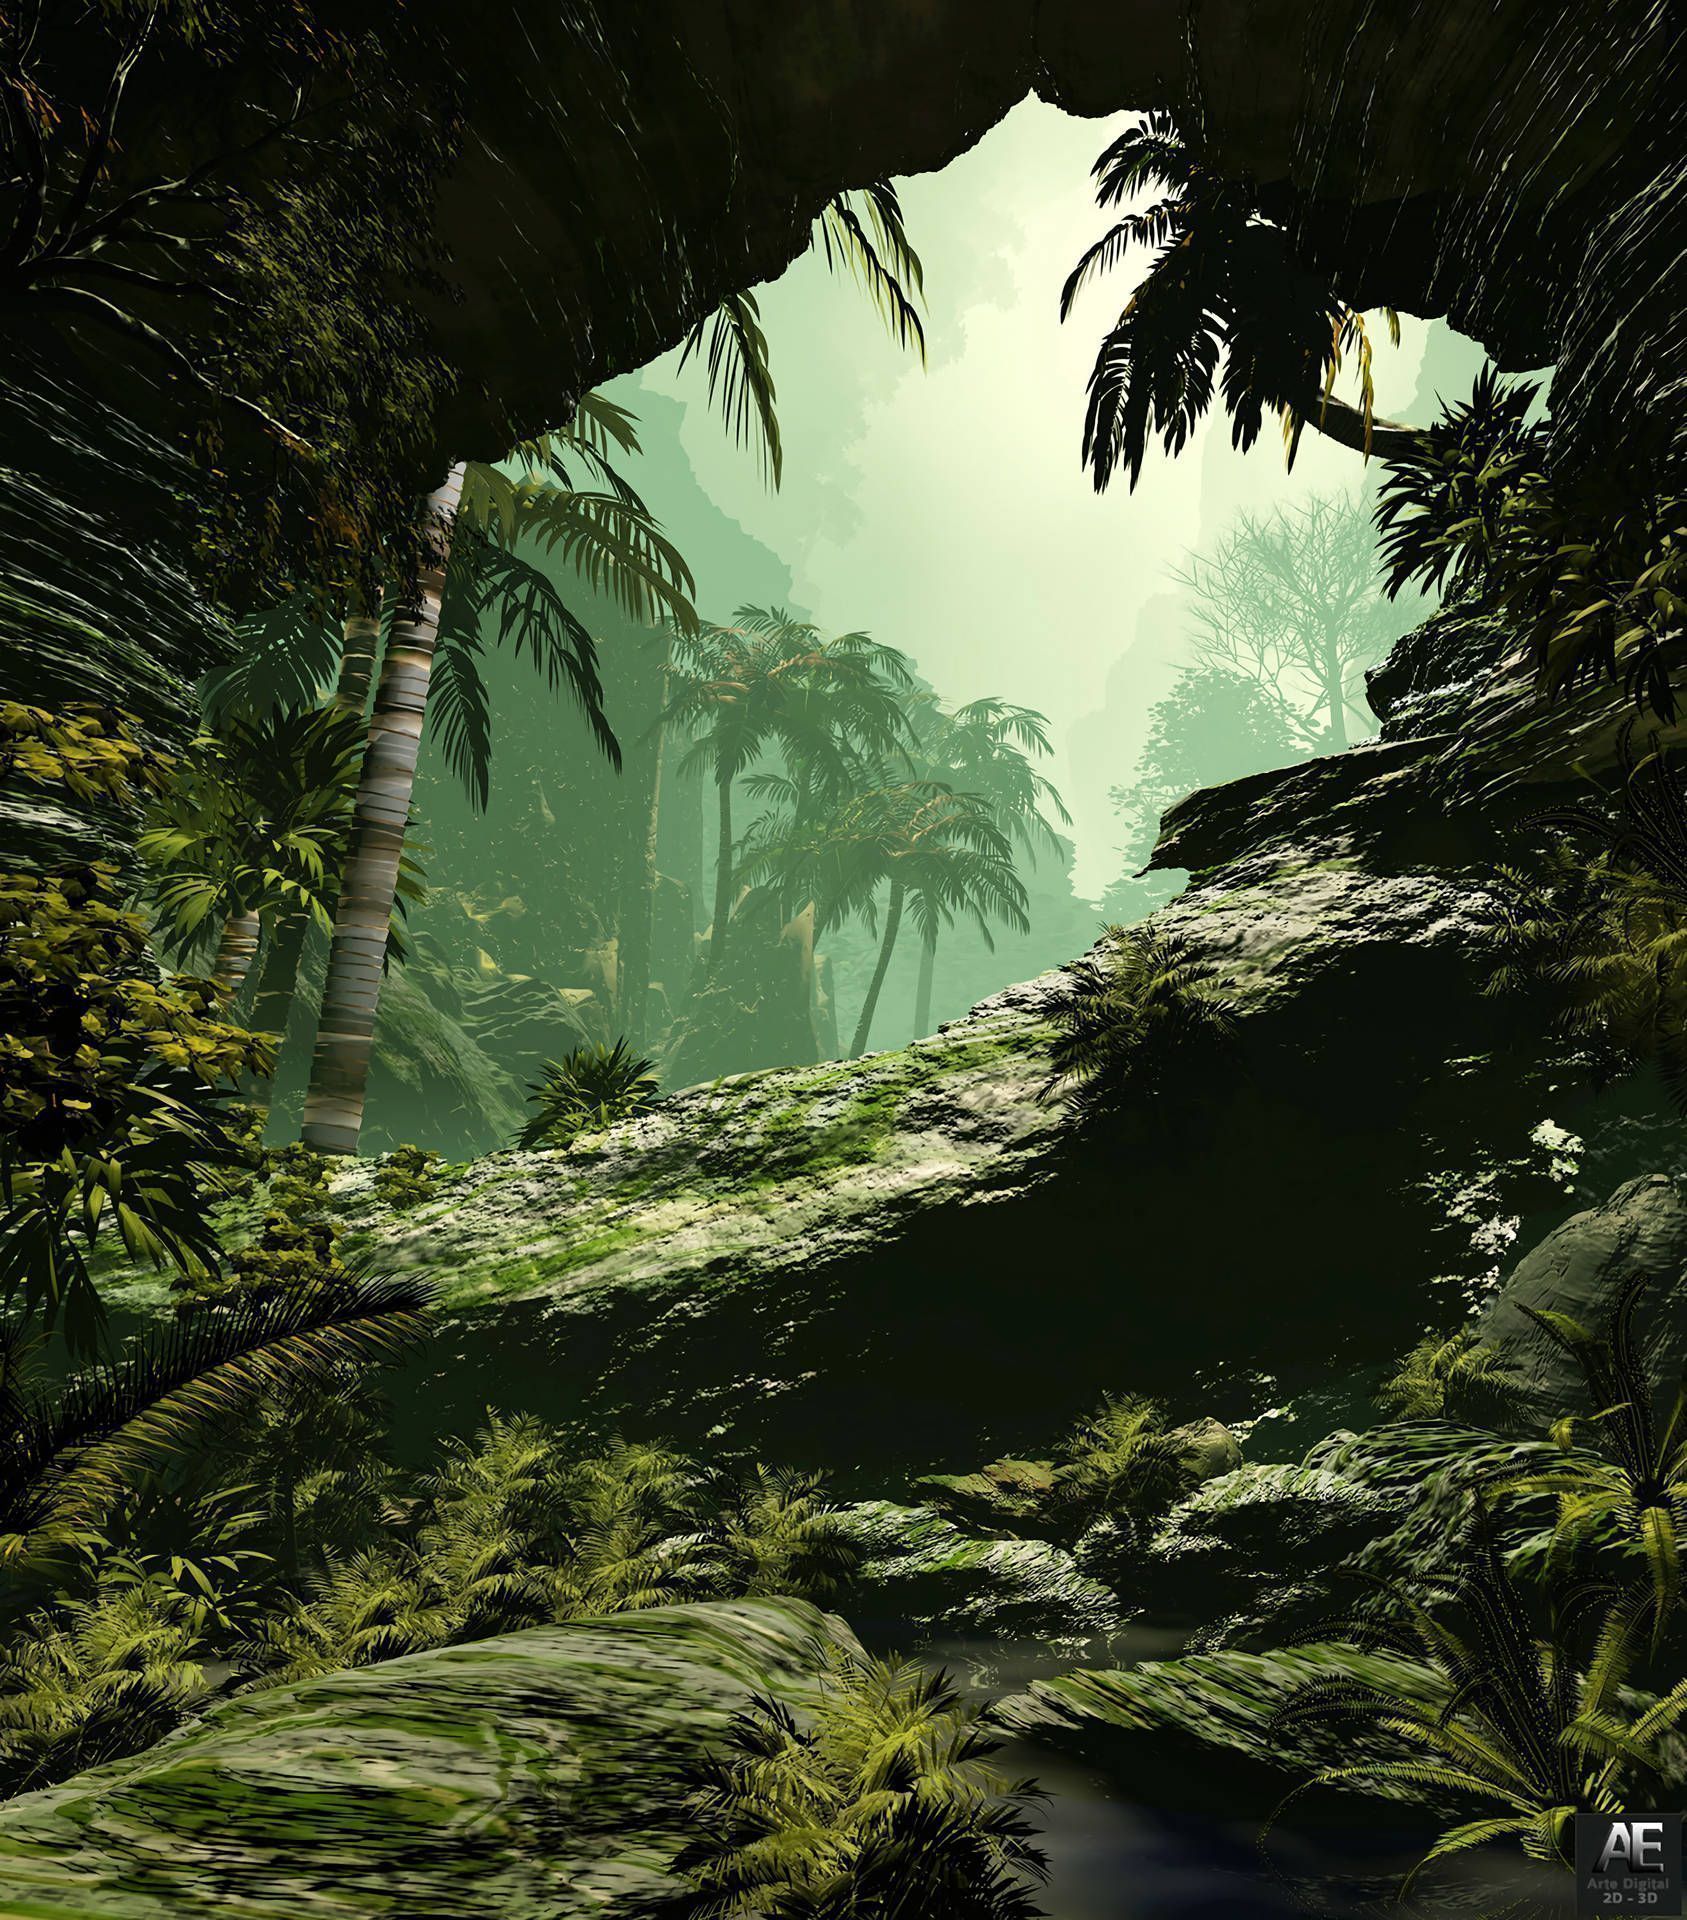 A cave with palm trees and water - Jungle